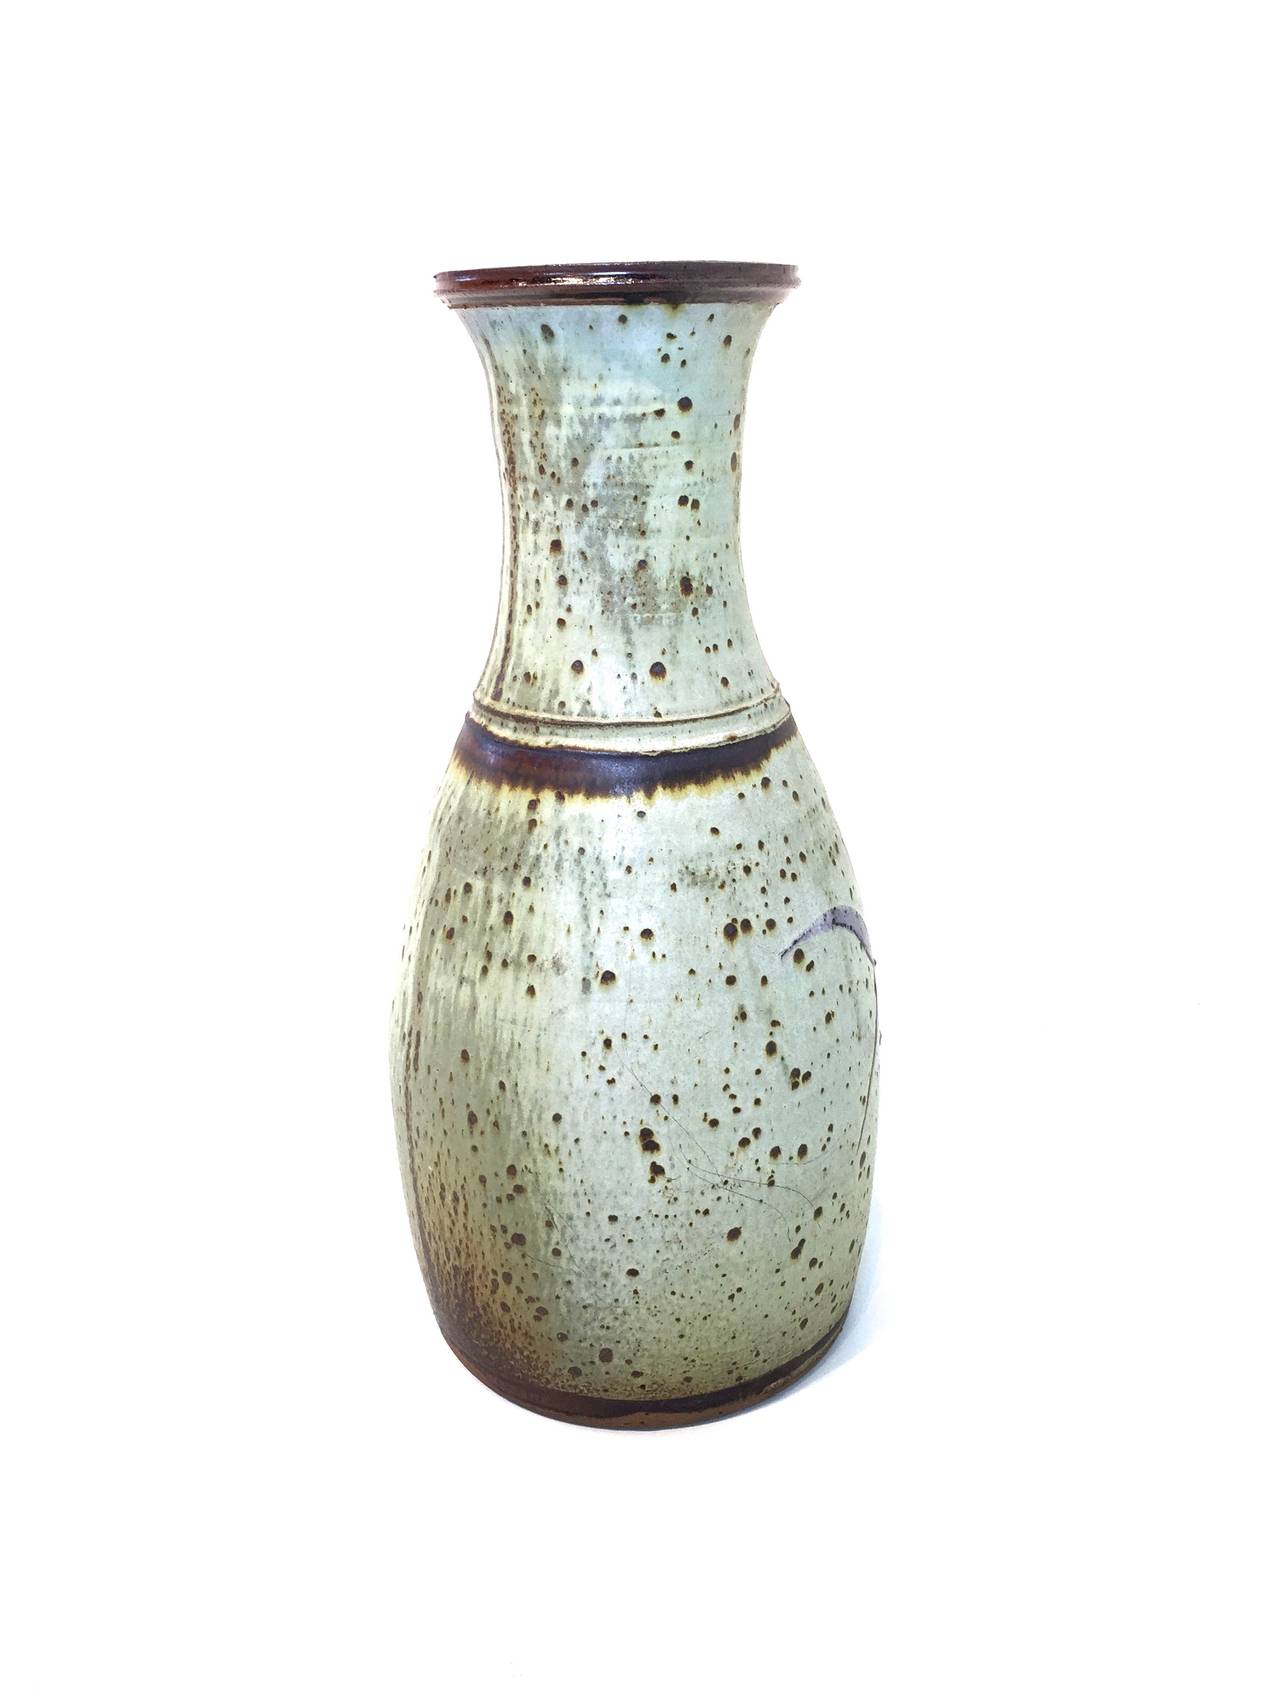 This spectacular hand-thrown pot closely shares the calligraphic style of Creitz's smaller pieces, but it is unsigned. It has a glossy interior glaze, while the outside is matte with brushwork. Creitz was a student of Ray Grimm at Portland State